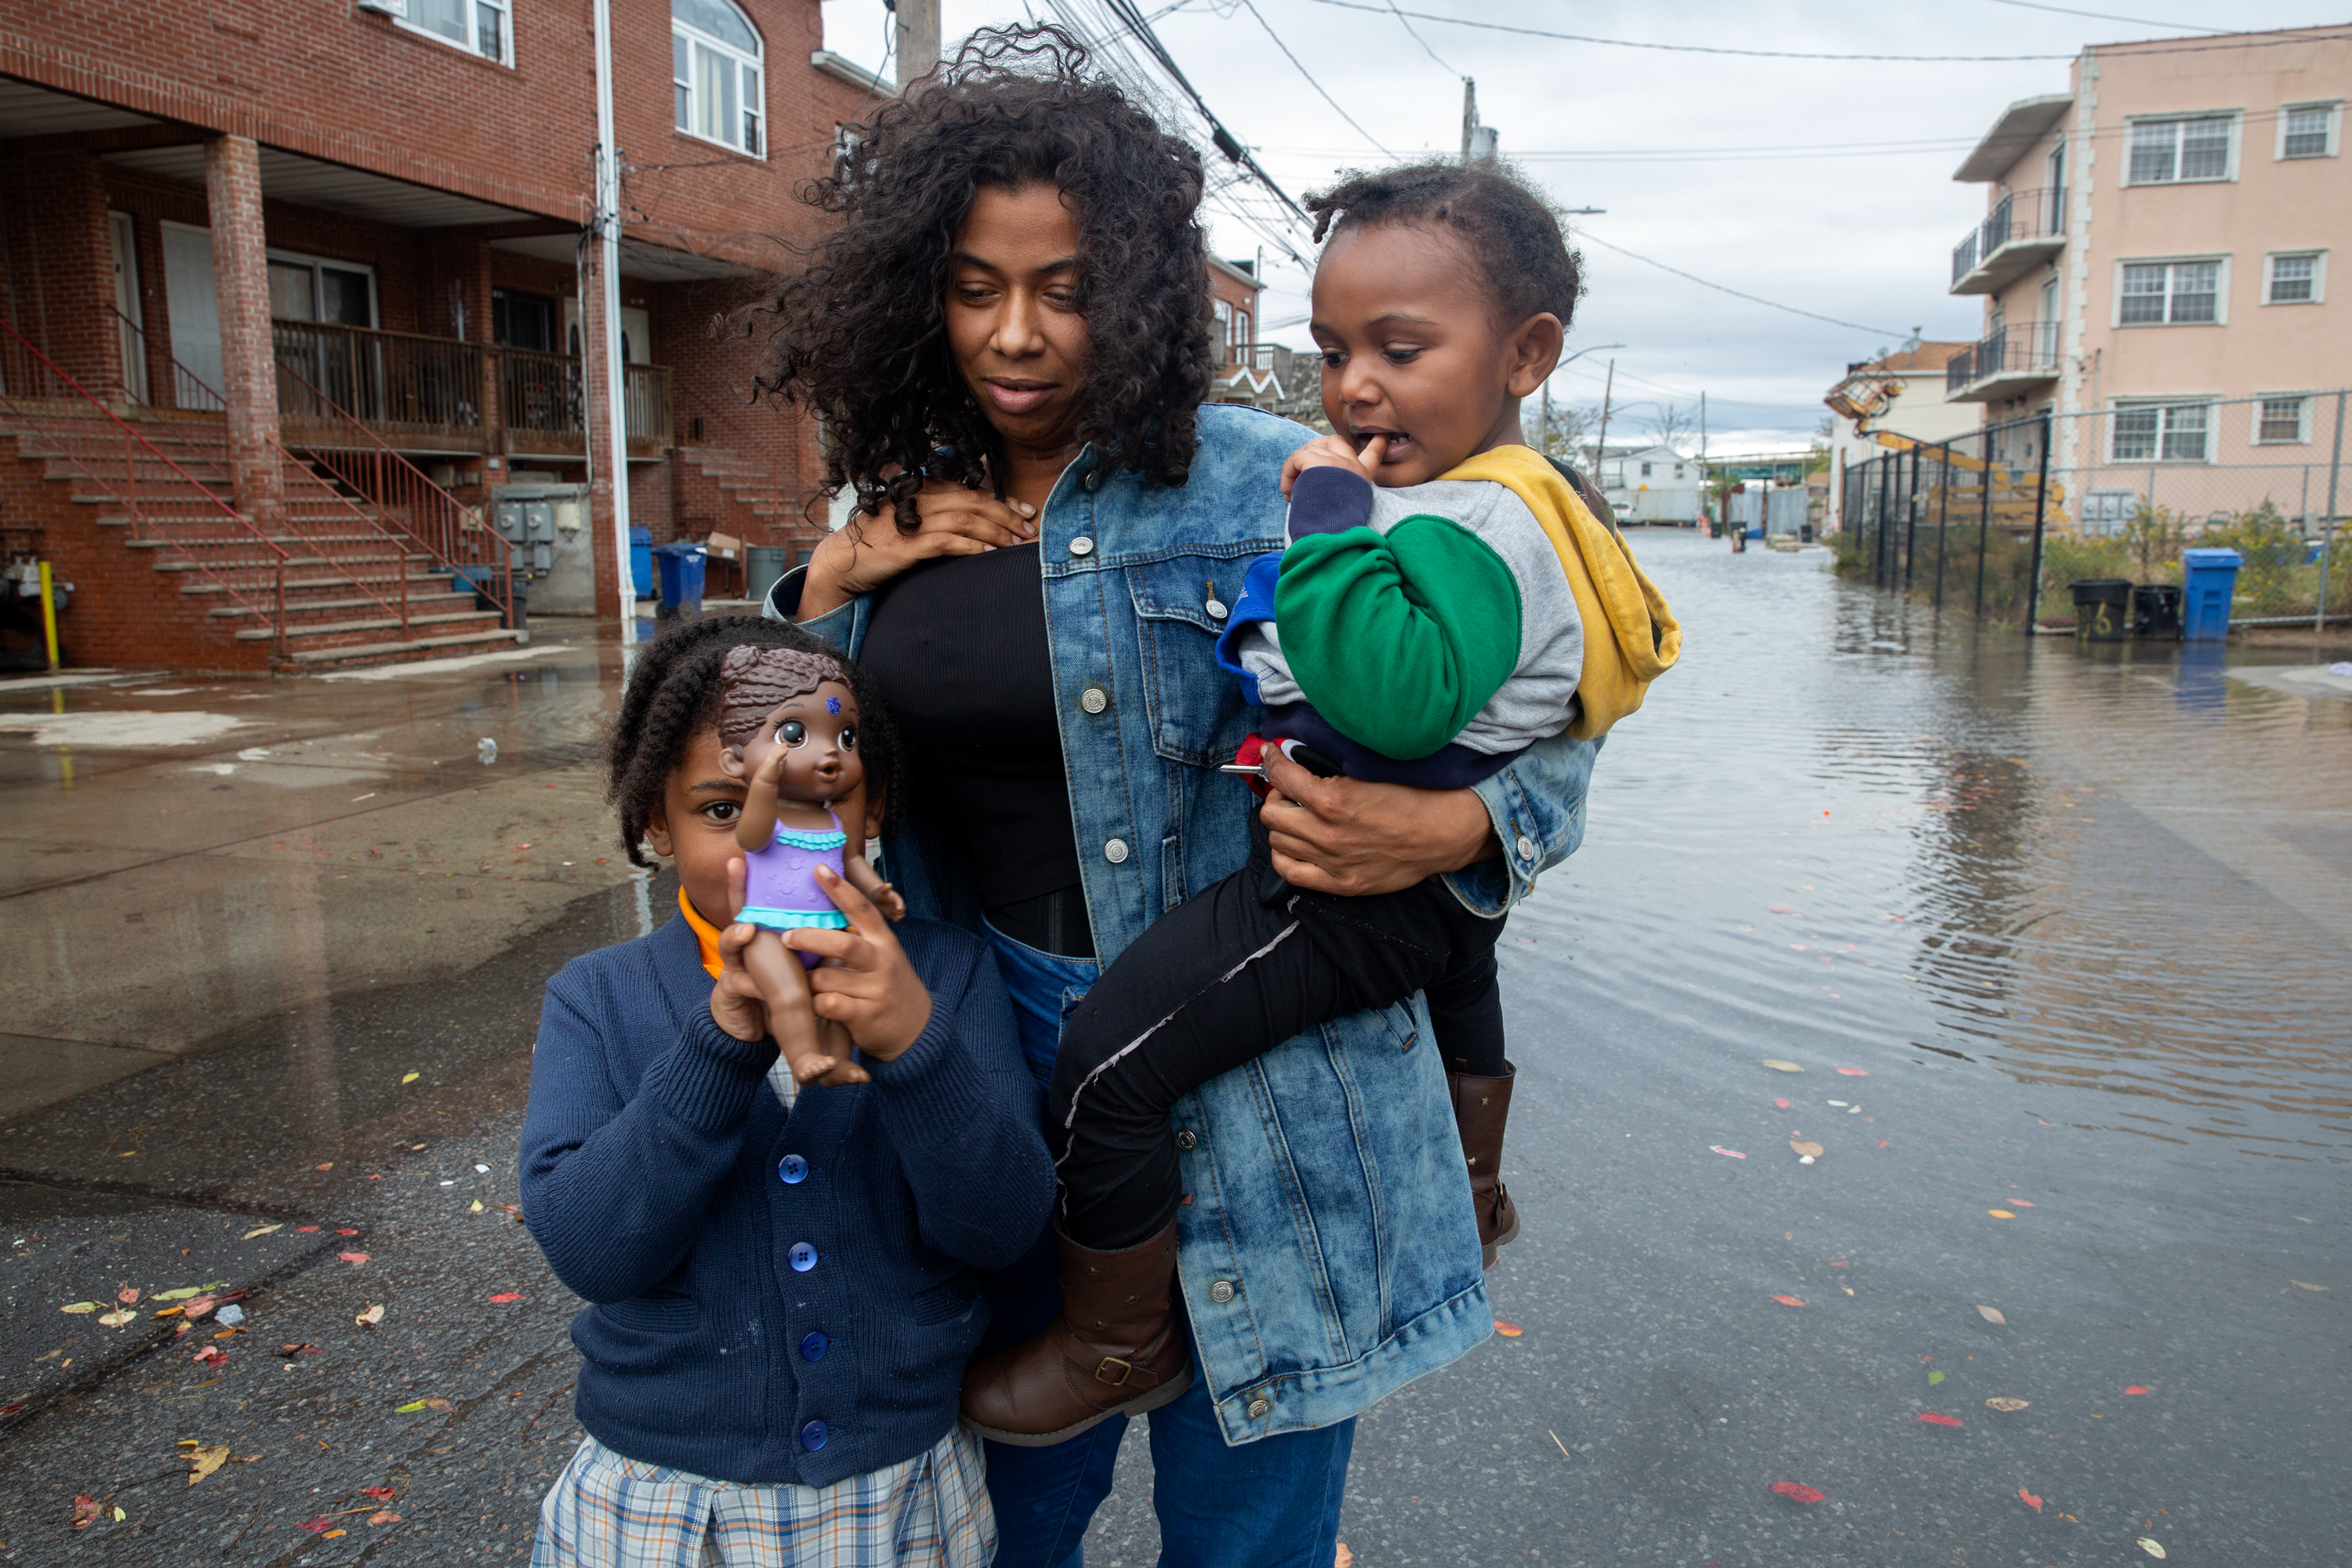 Amirah Khaafid said her block on Beach 84th Street in the Rockaways often floods, forcing her to carry her children through the water on the way to school, Oct. 27, 2021.